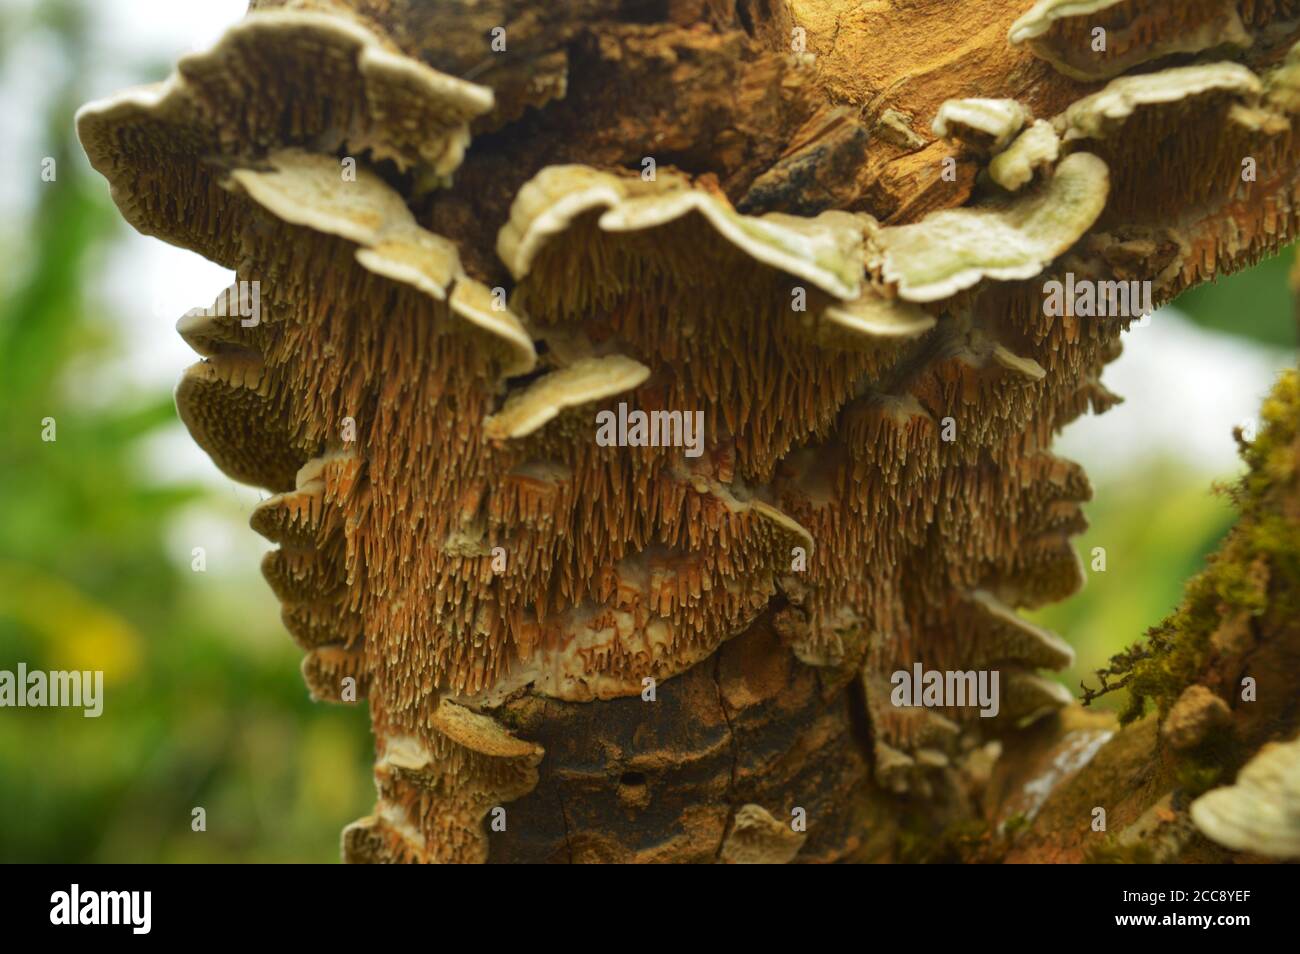 fungus on a tree bark with its lower side having a nice pattern. Fungi that decompose tree trunks can conjure up real works of art in wood. In nature, Stock Photo